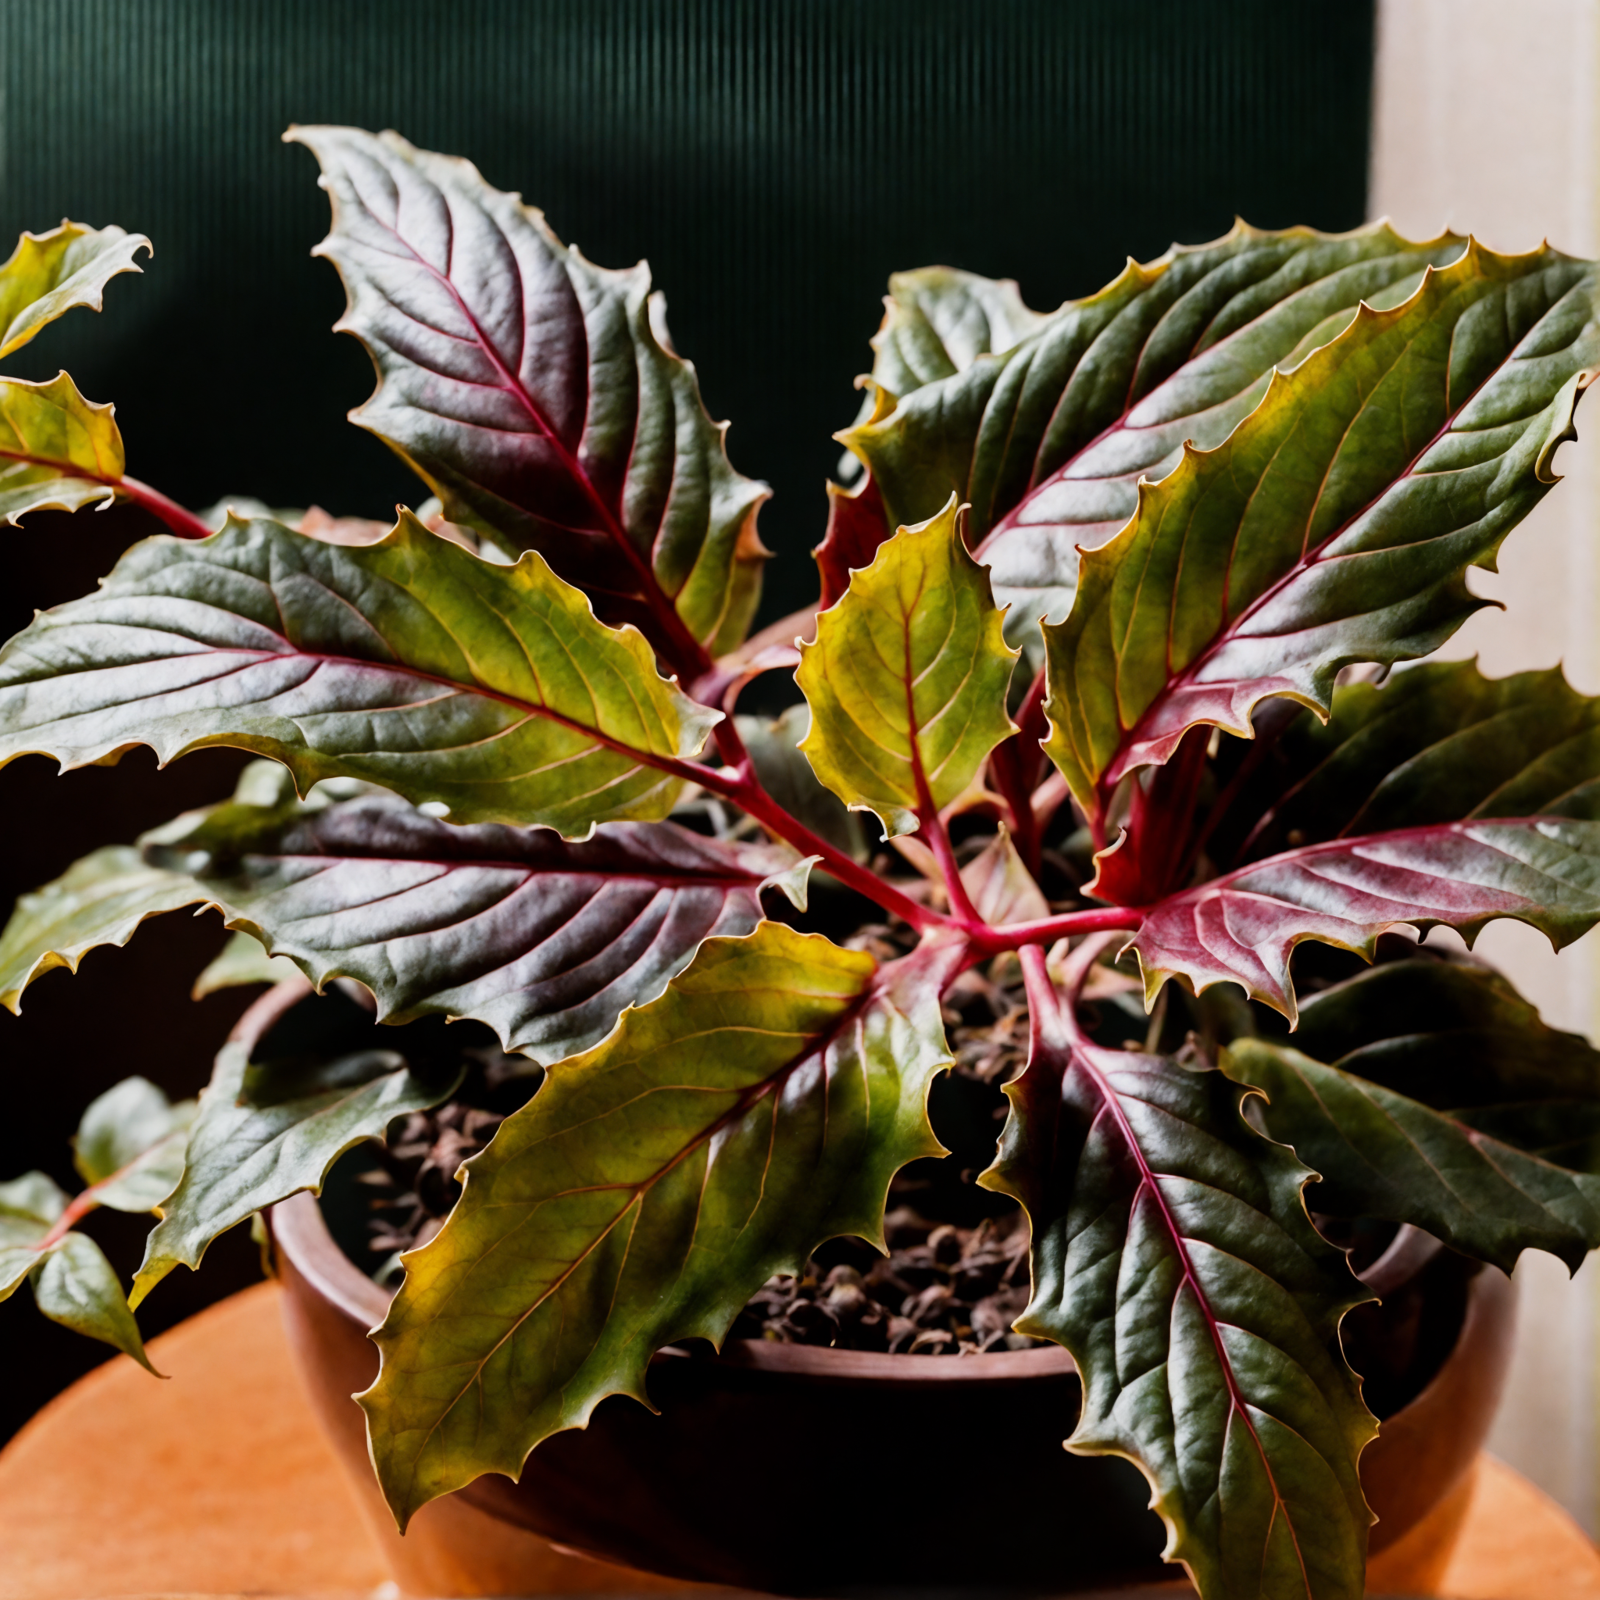 Gynura aurantiaca with vibrant leaves in a bowl on a table, well-lit against a dark background.